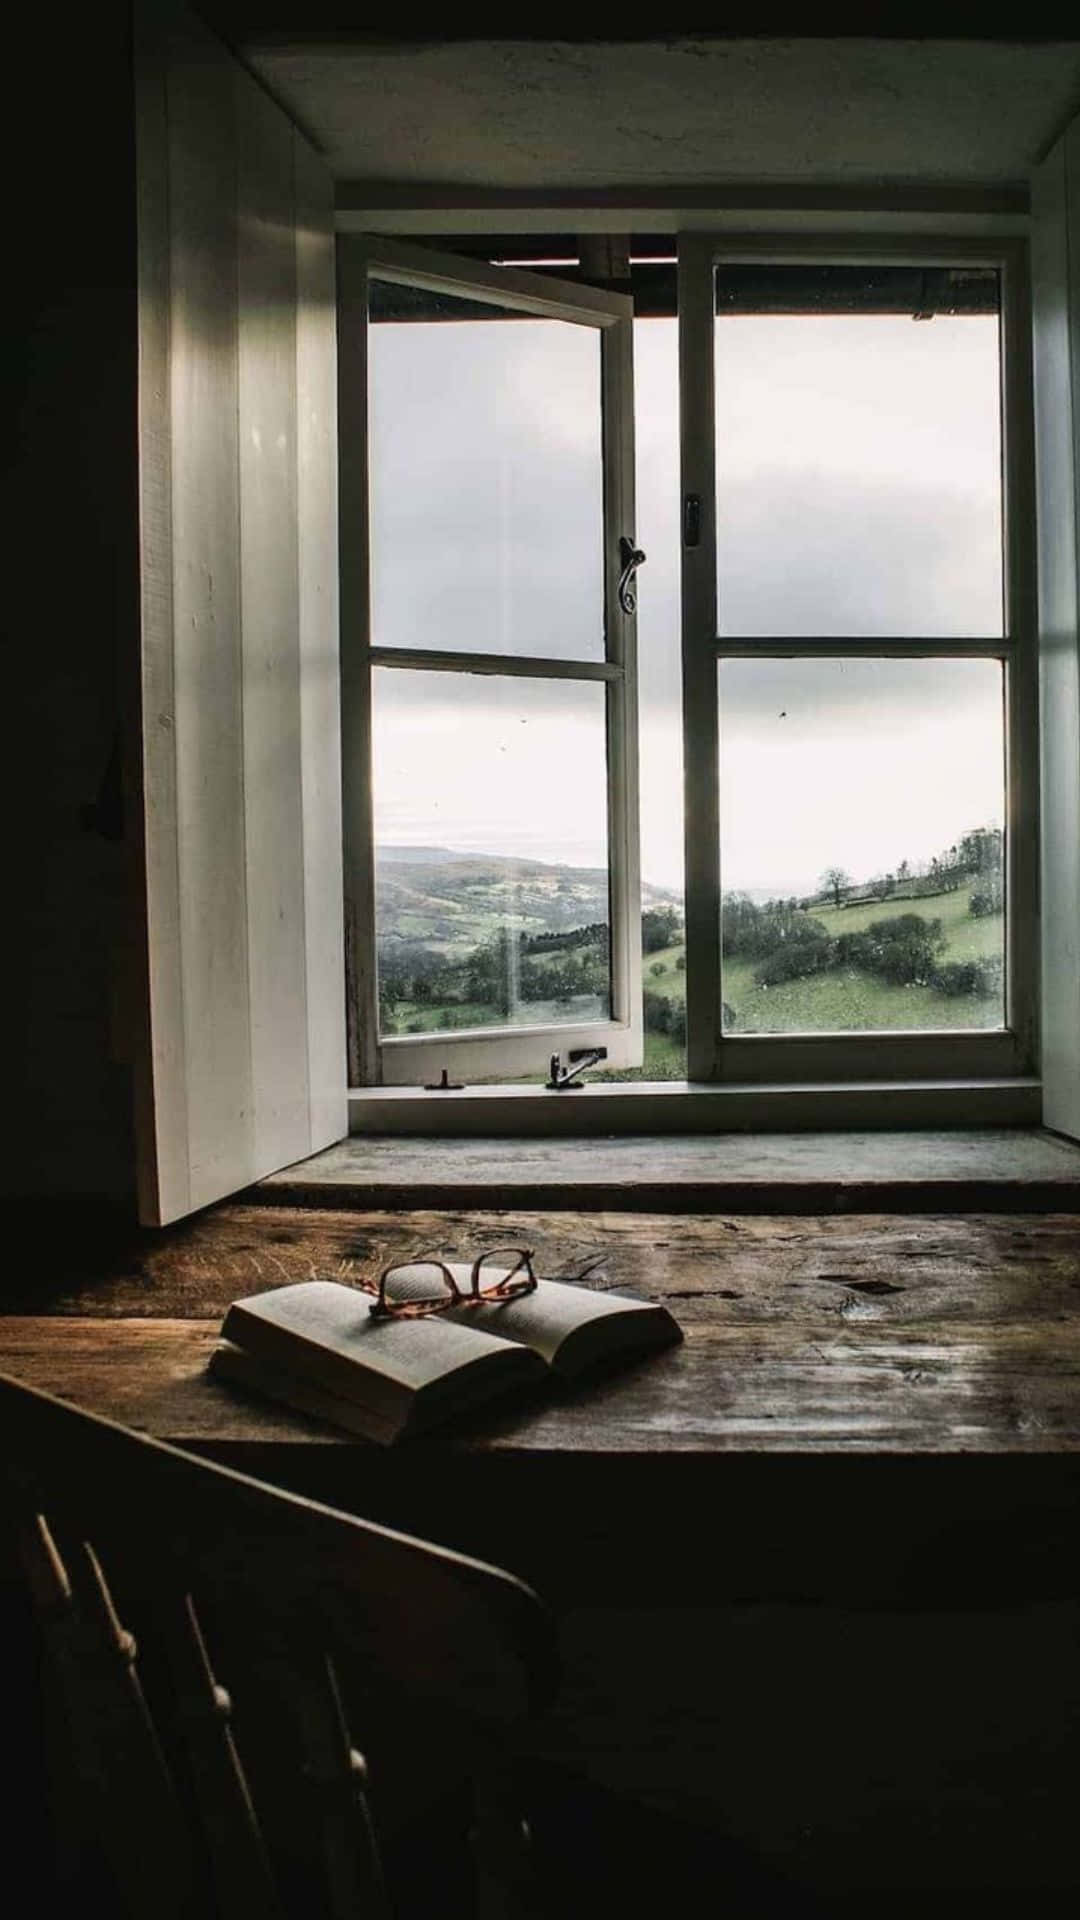 View of a window facing a beautiful landscape.